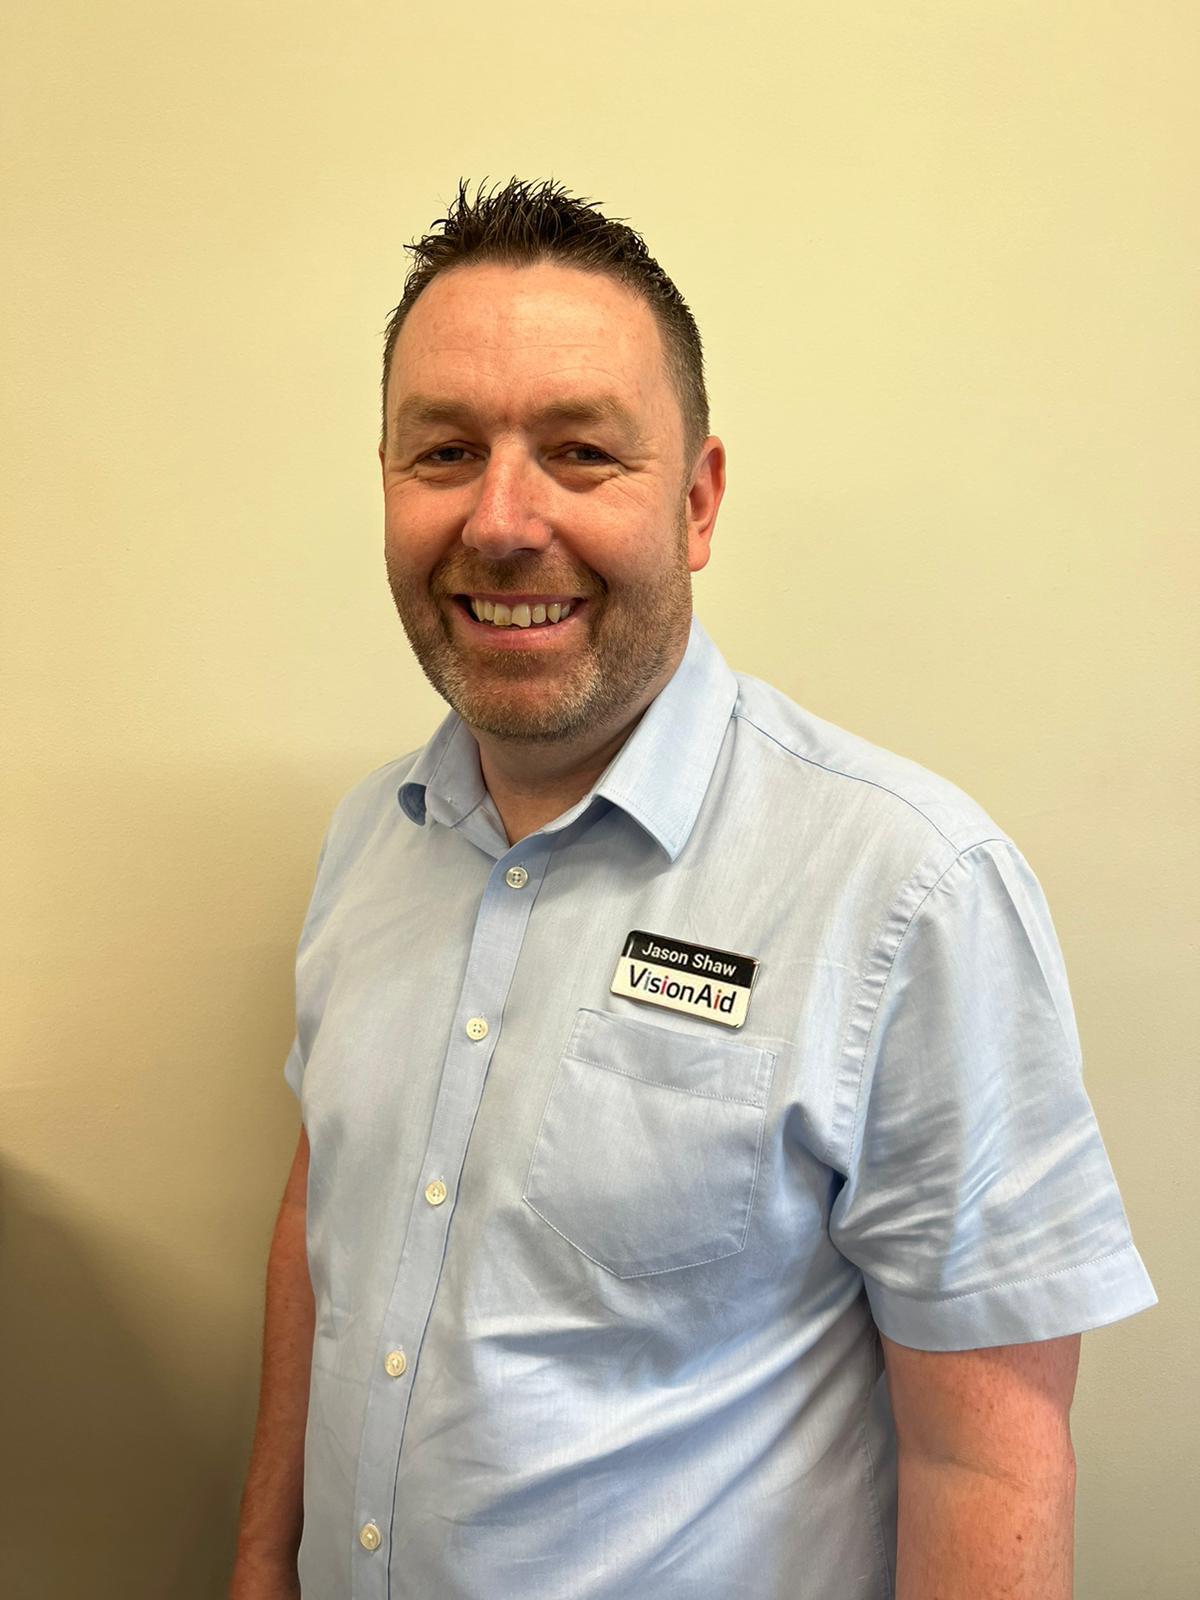 Jason Shaw our sales manger for the north of the uk, Jason is wearing a light blue shirt